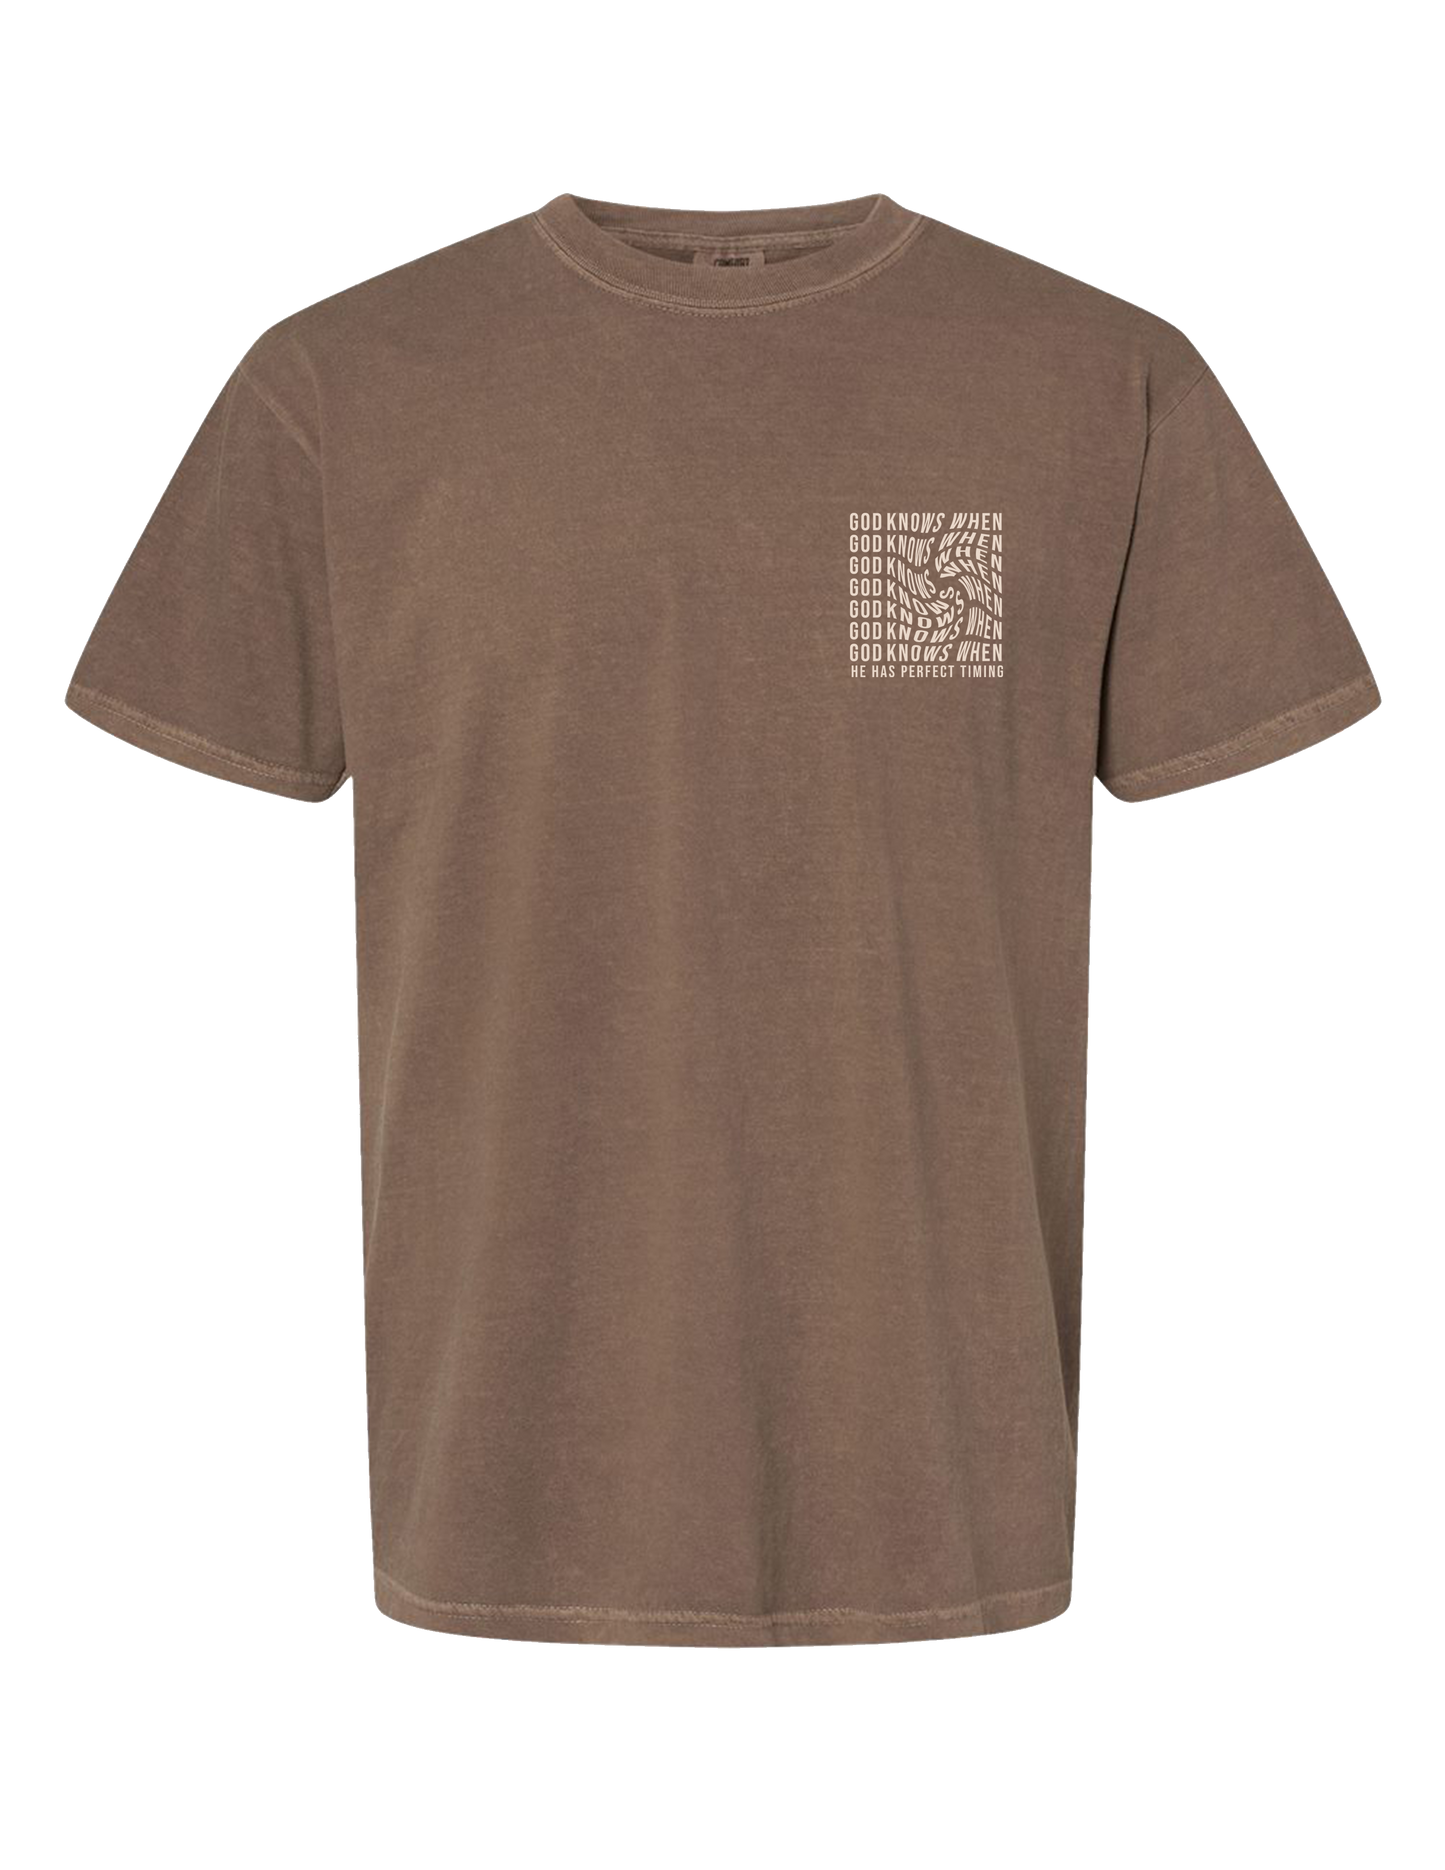 God Knows When Graphic Tee - Comfort Colors Espresso